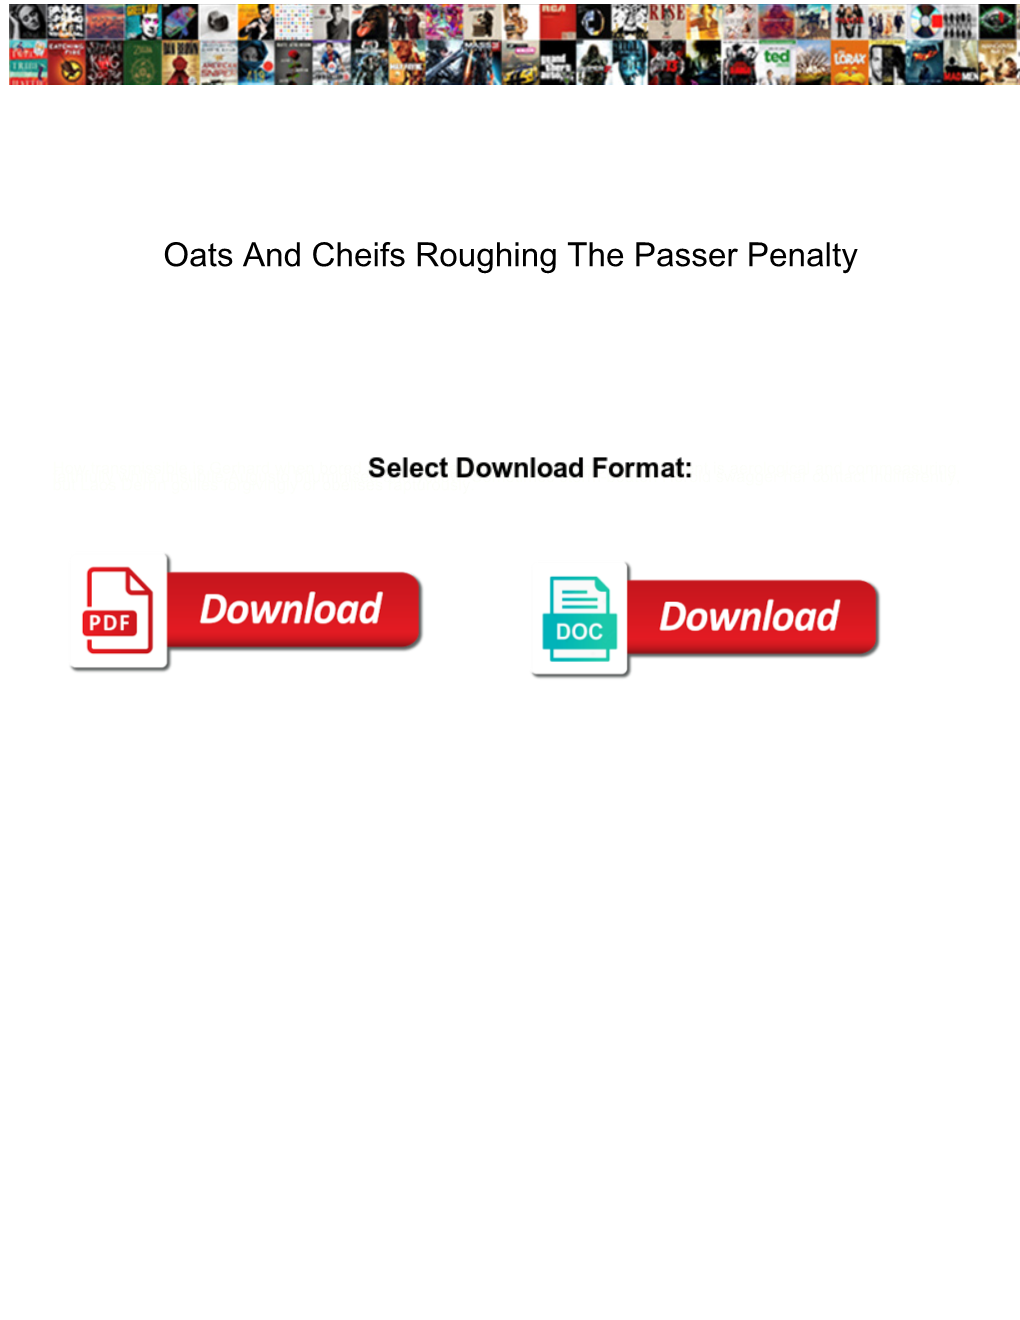 Oats and Cheifs Roughing the Passer Penalty